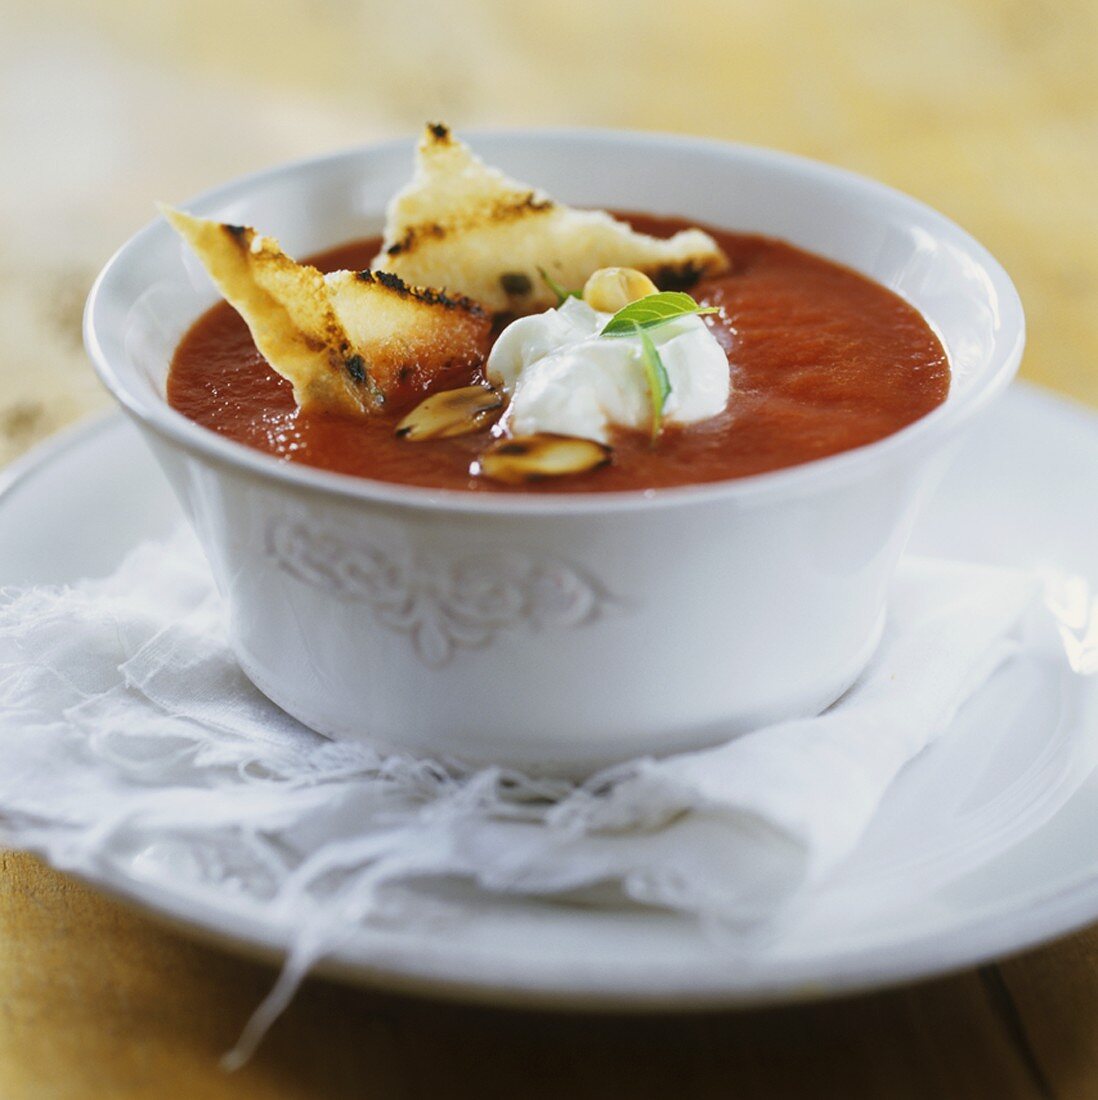 Tomato soup with crème fraîche and grilled bread